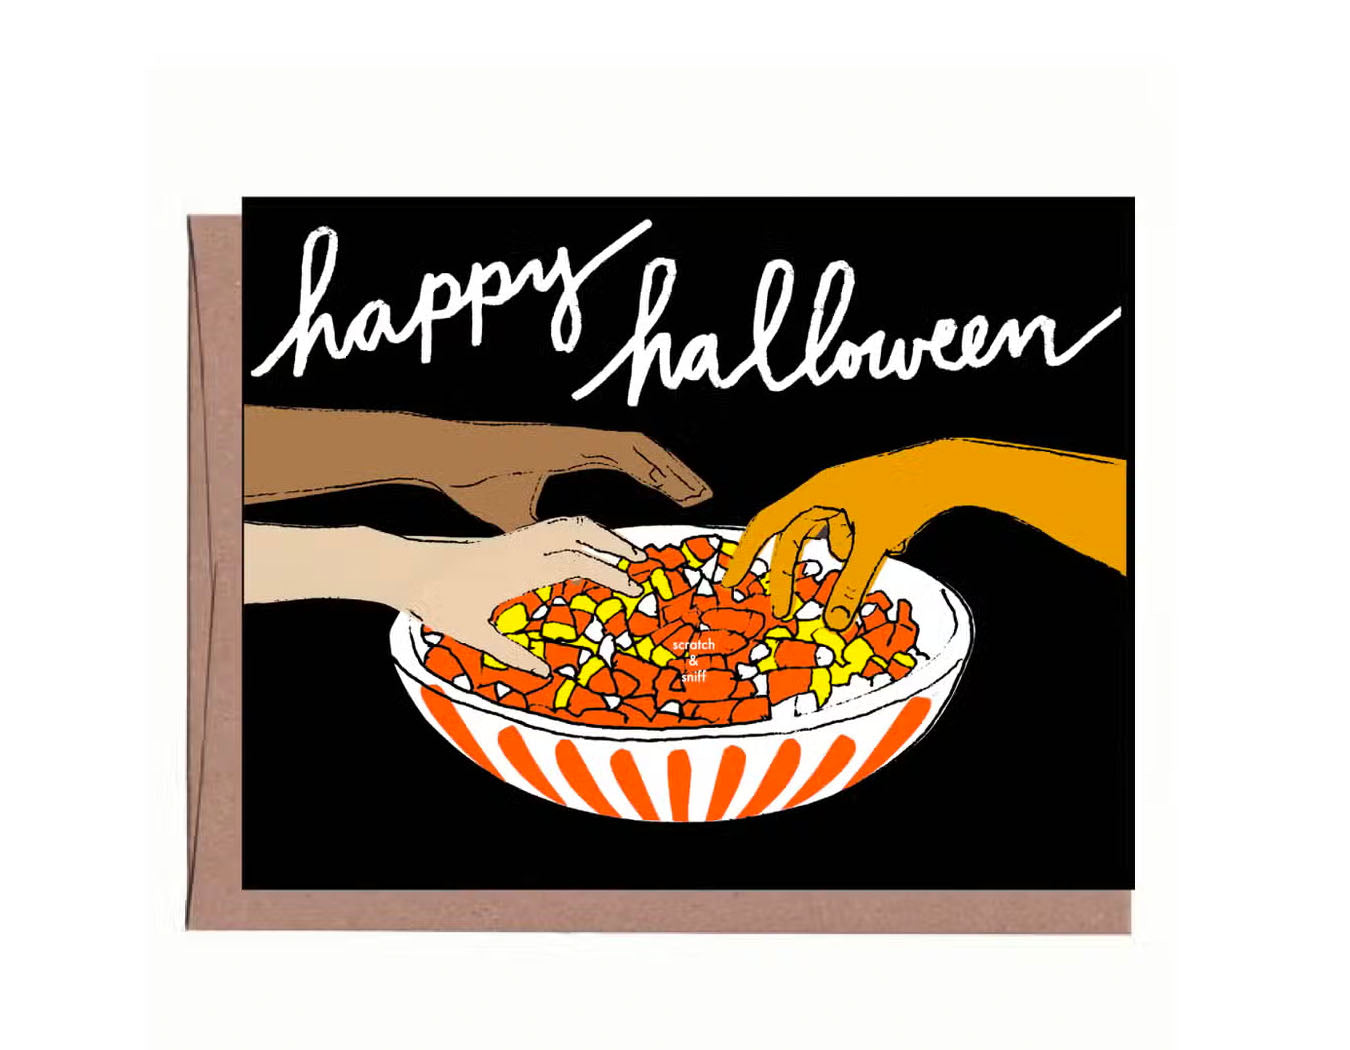 Scratch & Sniff Candy Corn Halloween Greeting Card